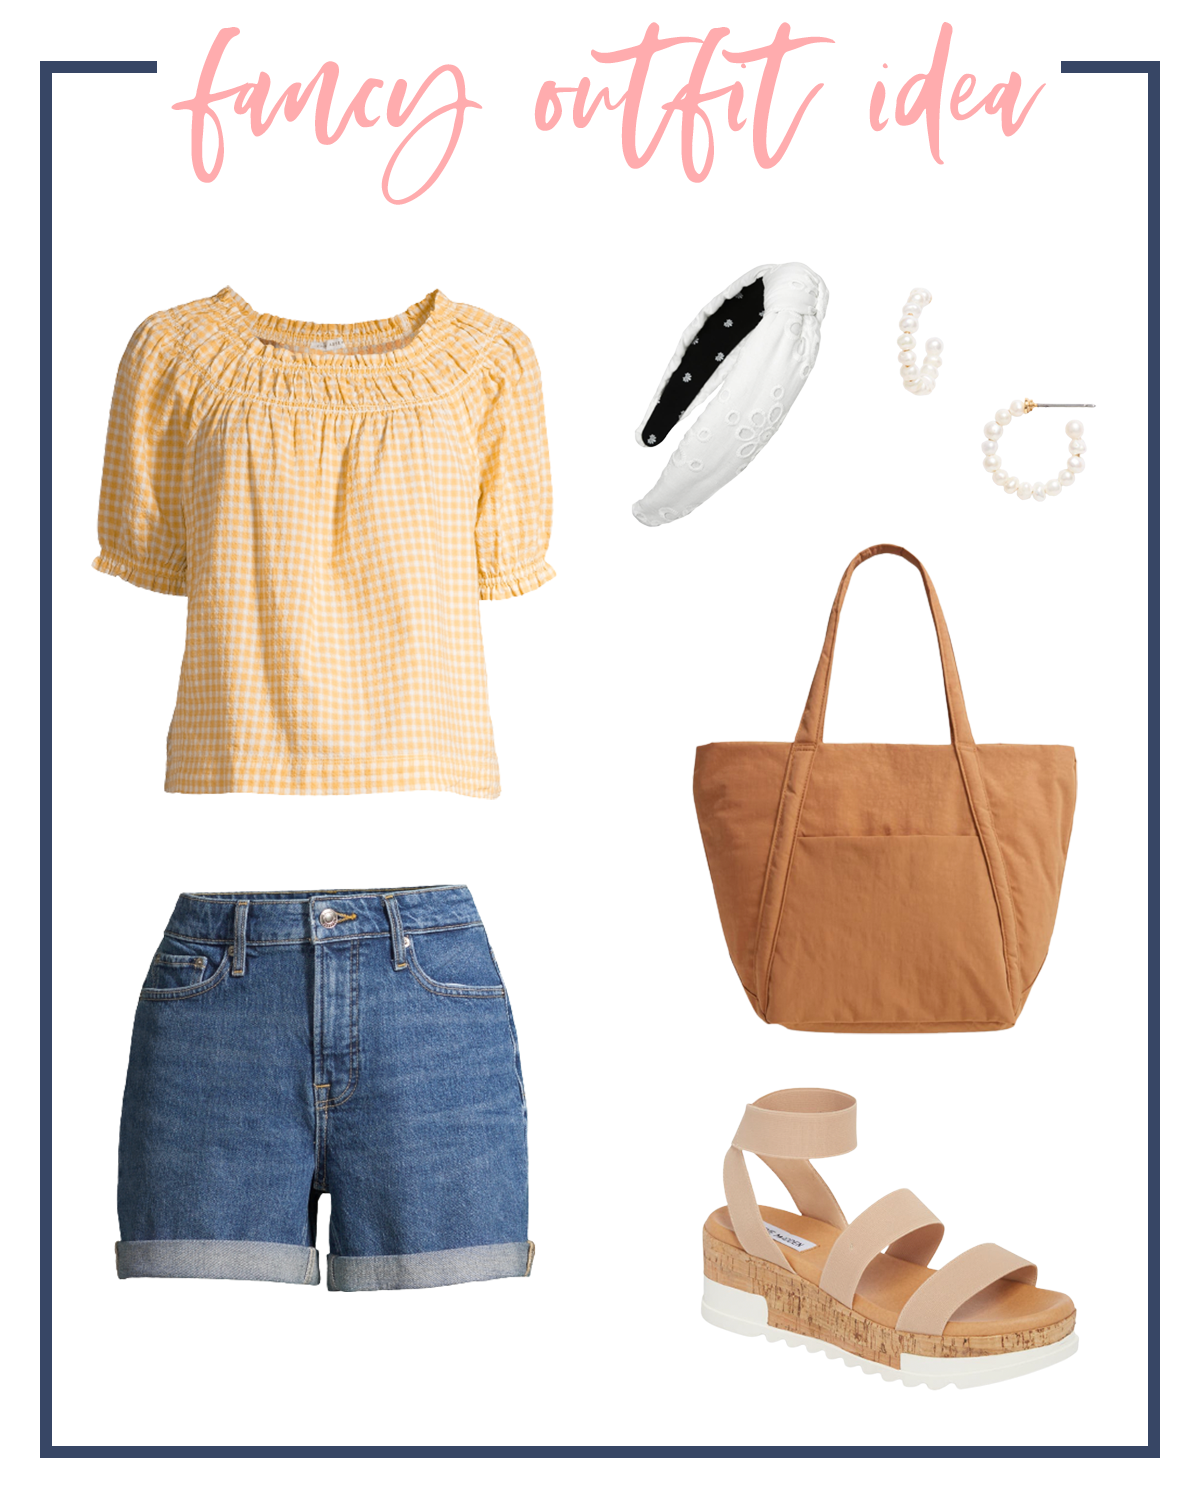 Denim Shorts by popular Houston fashion blog, Fancy Ashley: image of a yellow gingham blouse, white knot headband, white pearl hoop earrings, brown tote, Steve Madden wedge sandals, and cuffed denim shorts. 